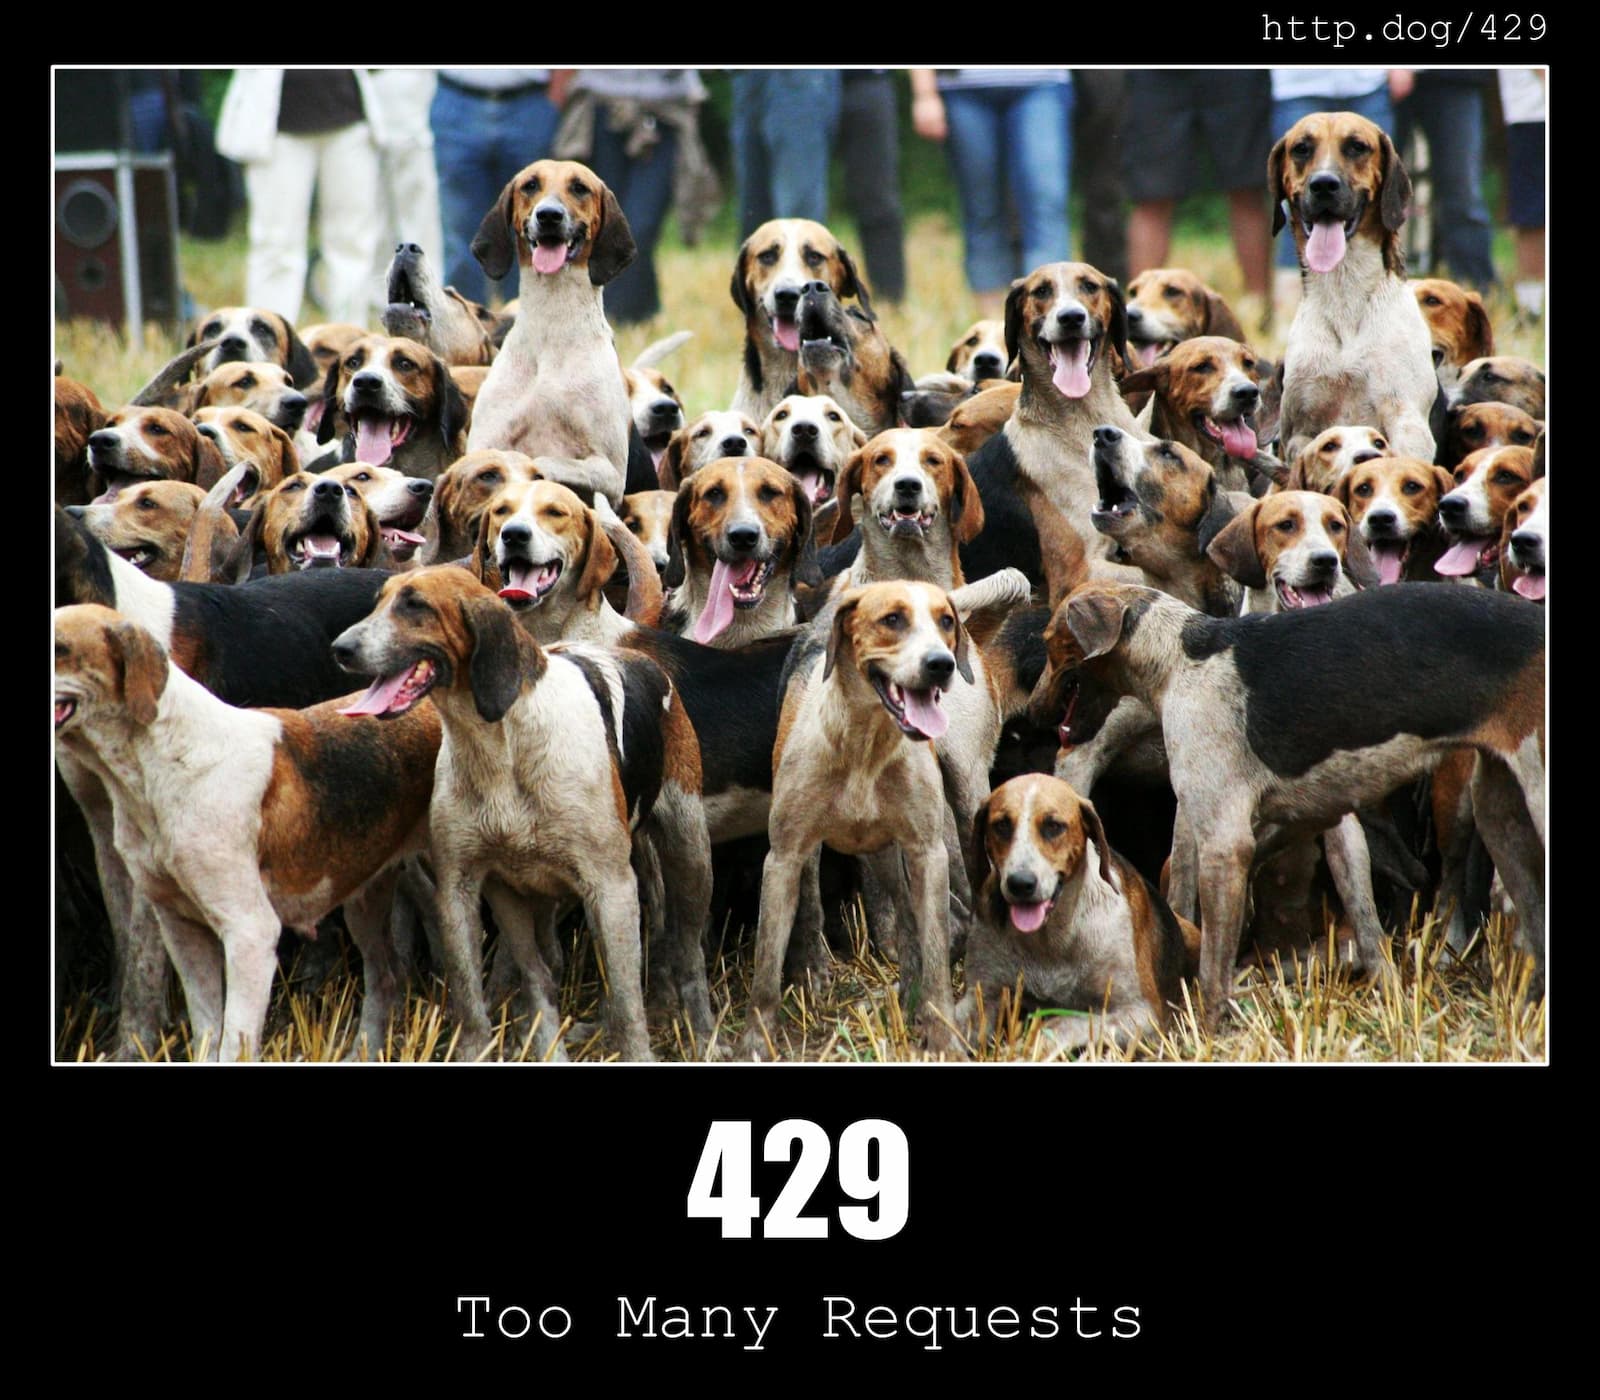 HTTP Status Code 429 Too Many Requests & Dogs